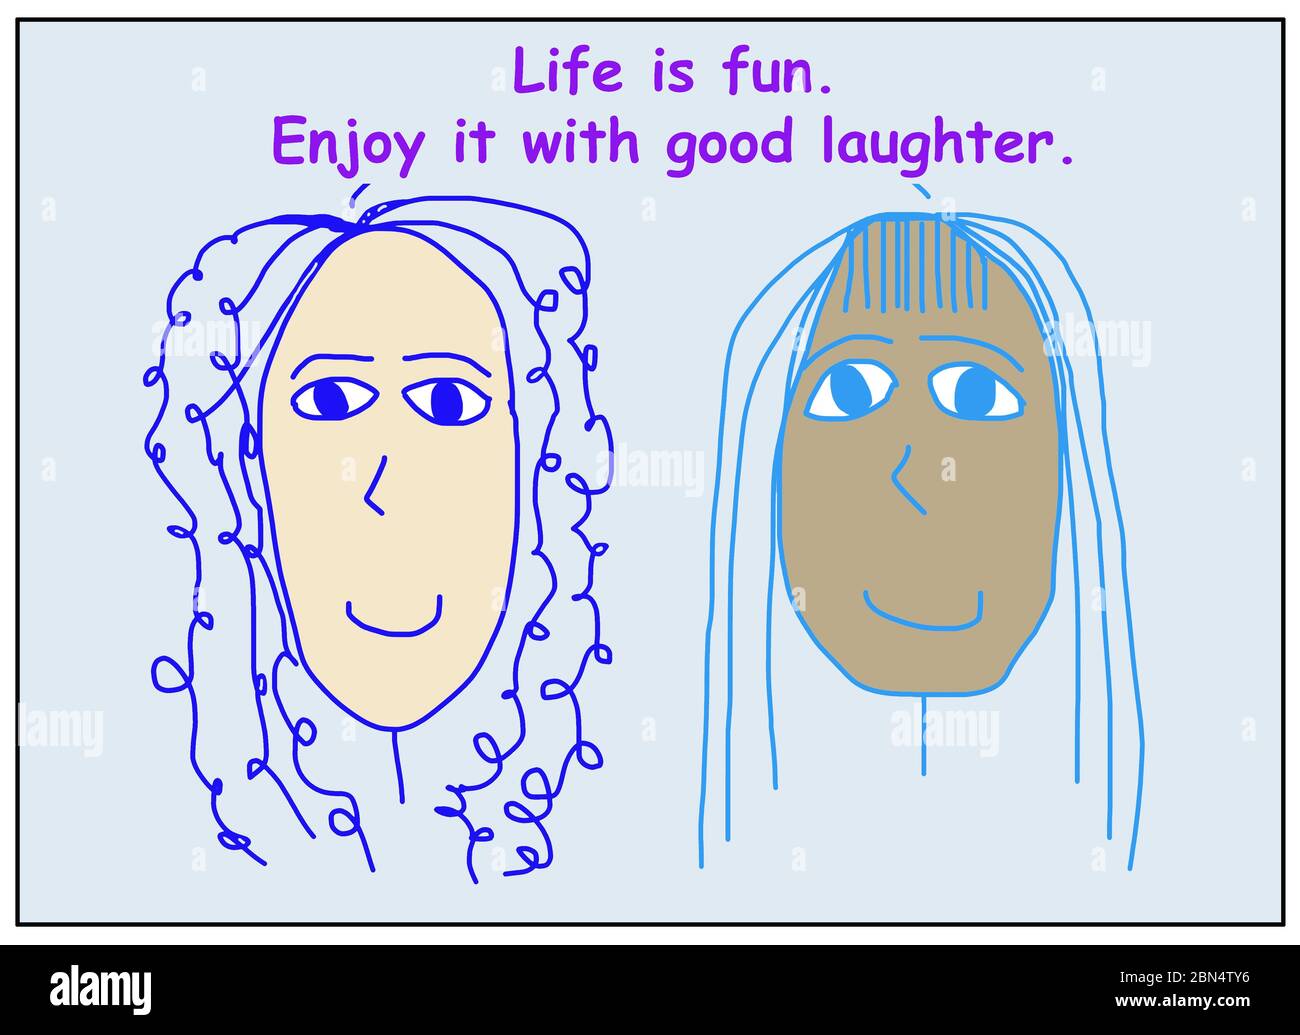 Color cartoon showing two smiling and ethnically diverse women saying life is fun, enjoy it with good laughter. Stock Photo